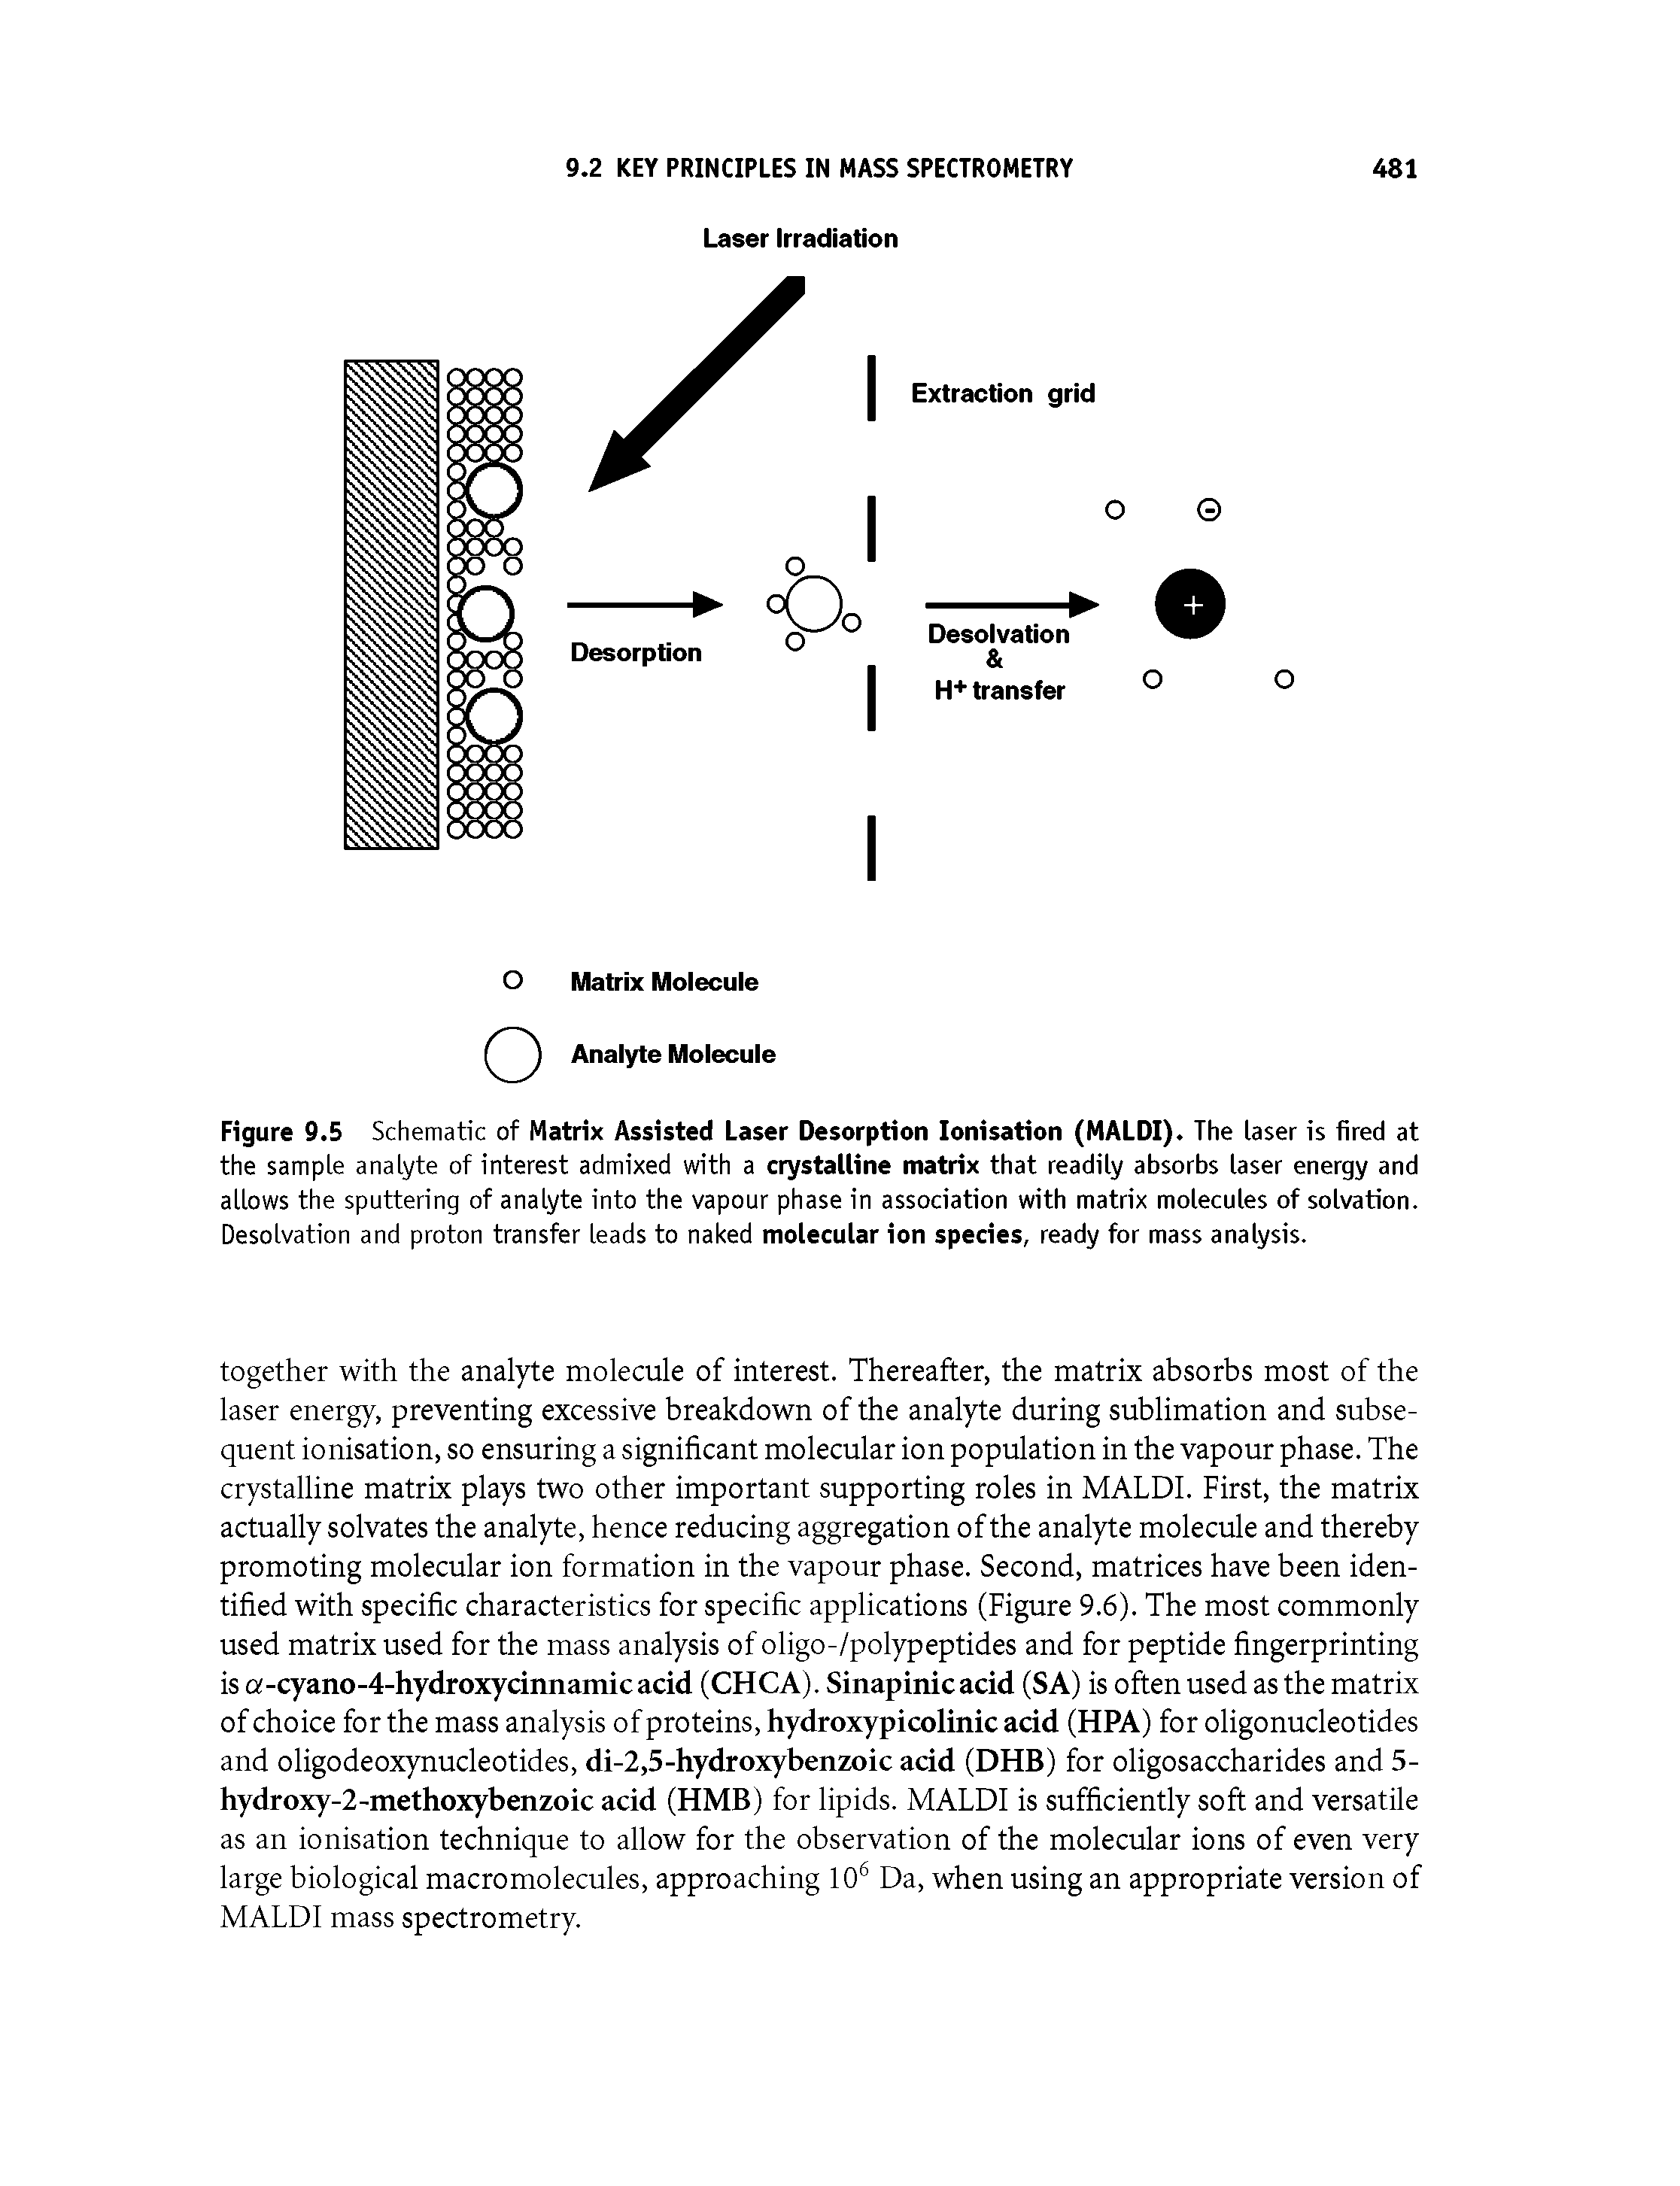 Figure 9.5 Schematic of Matrix Assisted Laser Desorption Ionisation (MALDI). The laser is fired at the sample analyte of interest admixed with a crystalline matrix that readily absorbs laser energy and allows the sputtering of analyte into the vapour phase in association with matrix molecules of solvation. Desolvation and proton transfer leads to naked molecular ion species, ready for mass analysis.